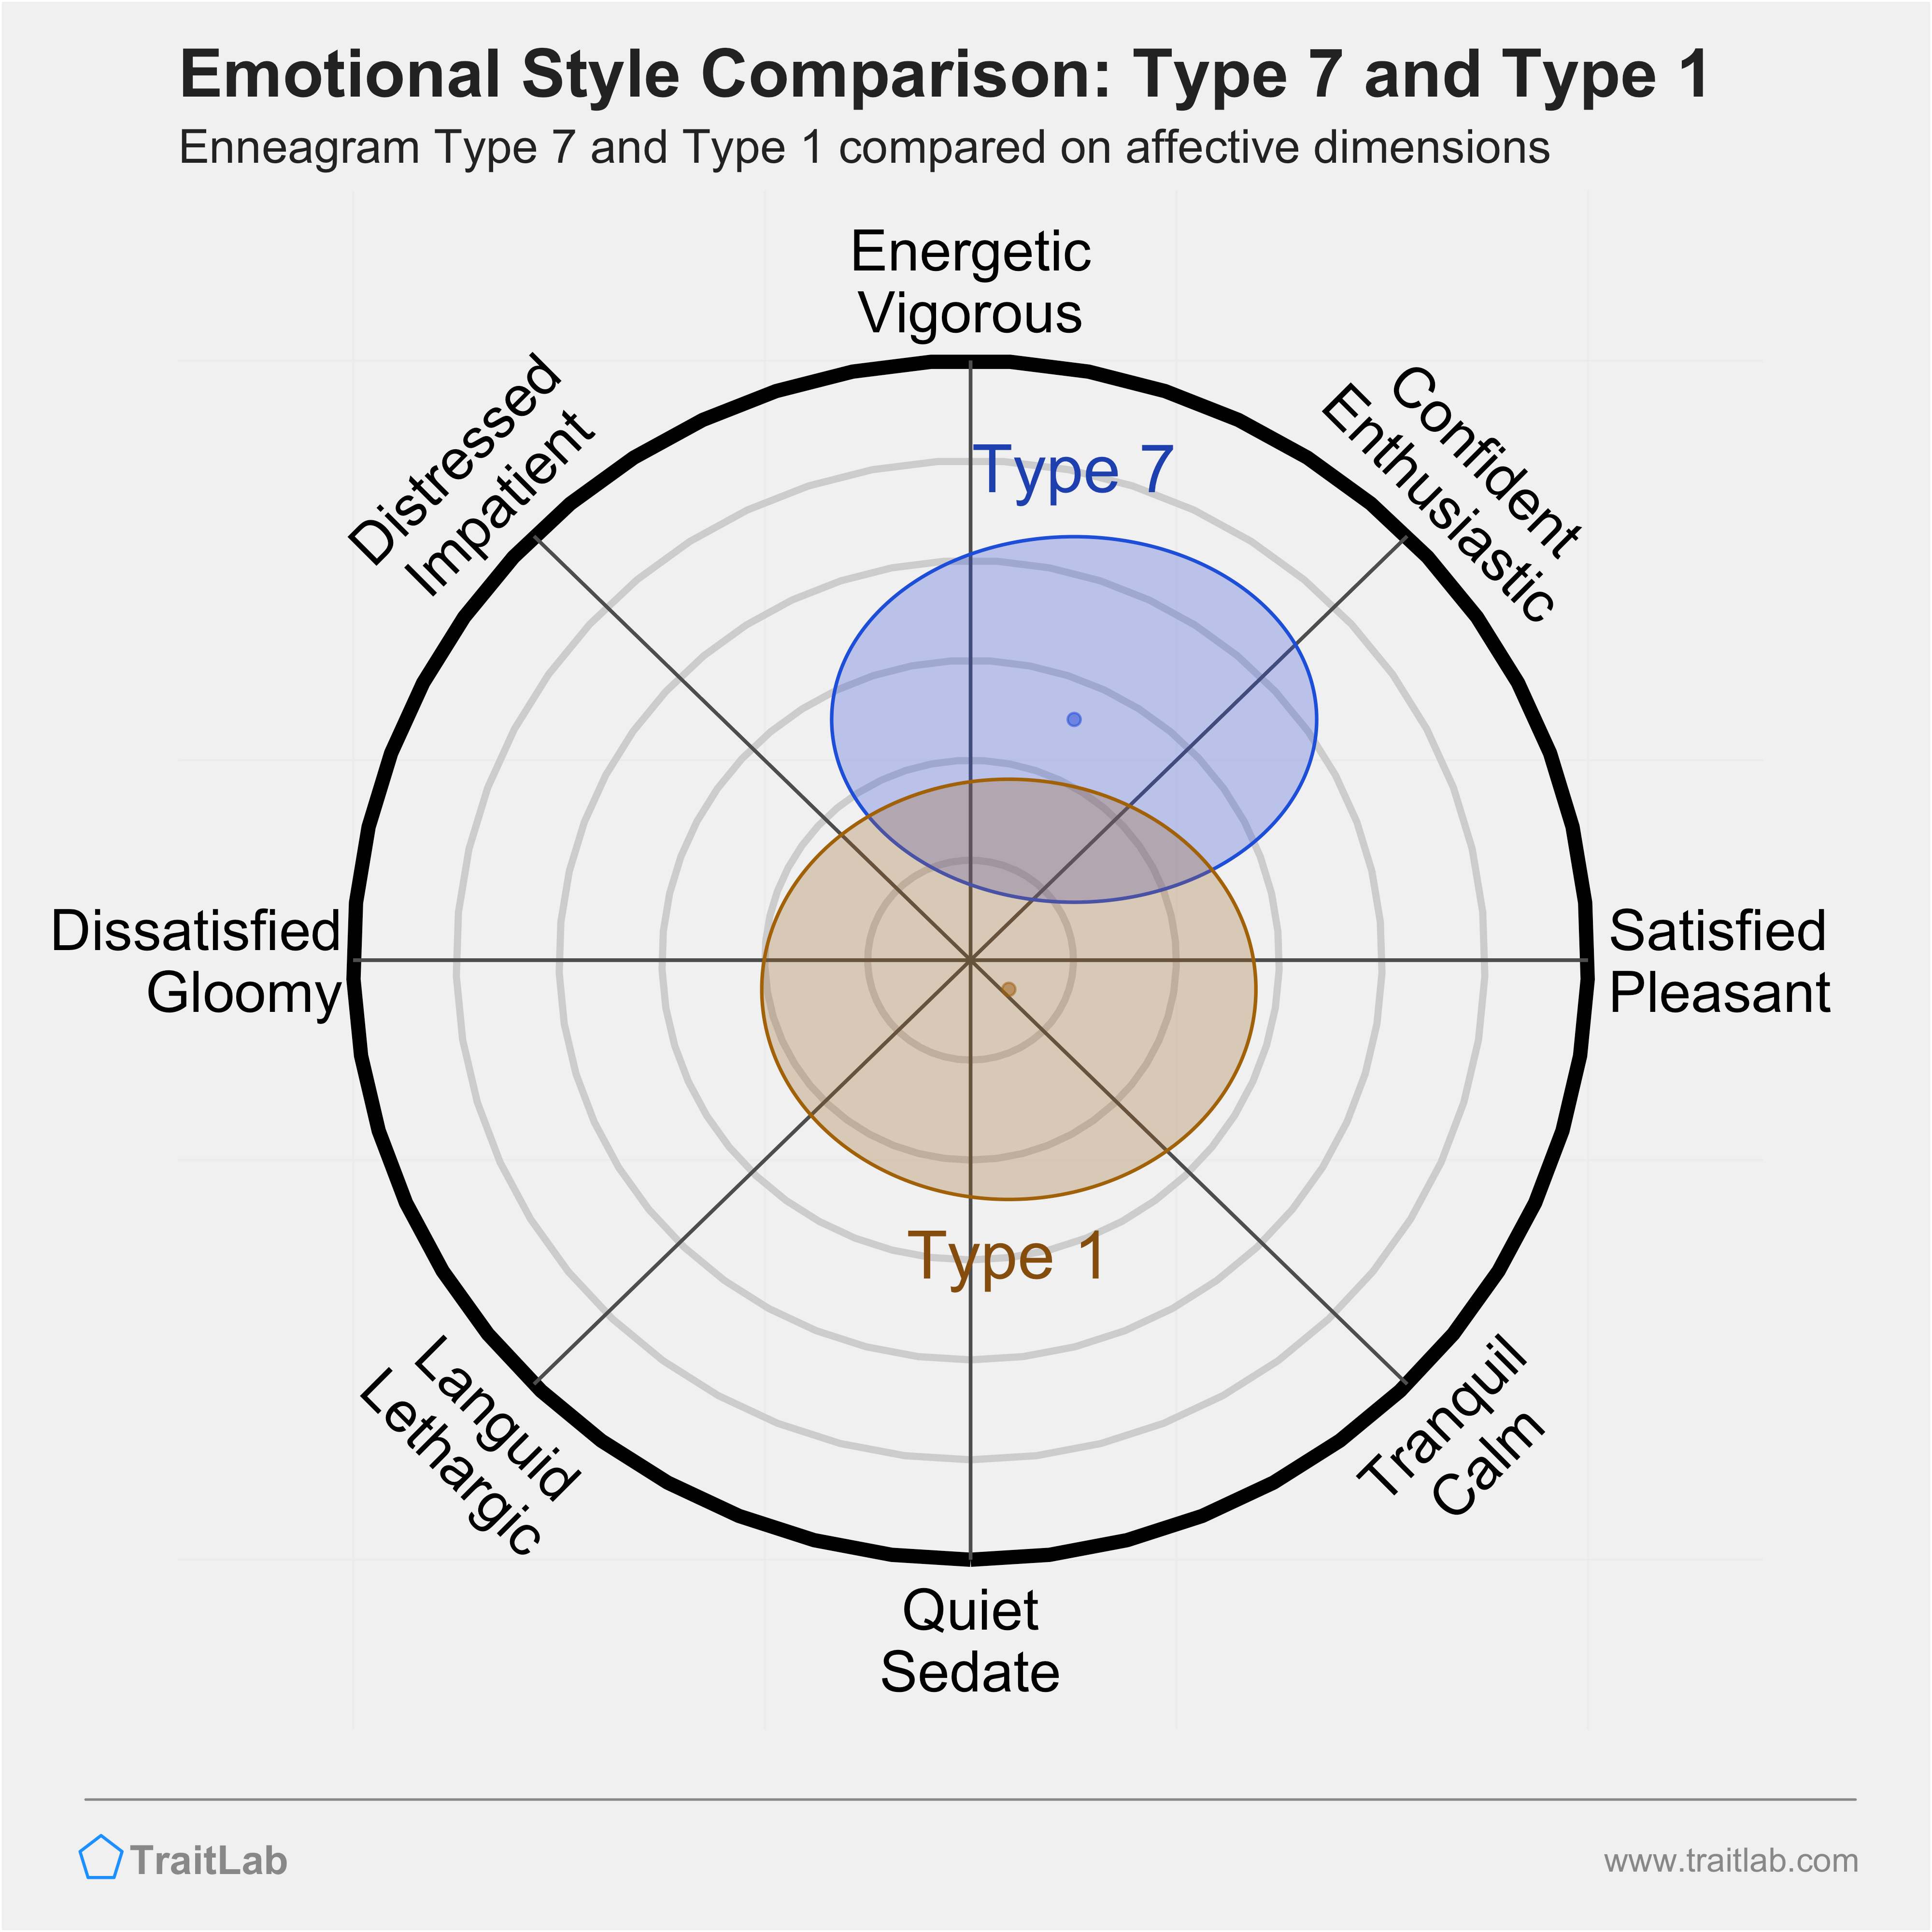 Type 7 and Type 1 comparison across emotional (affective) dimensions